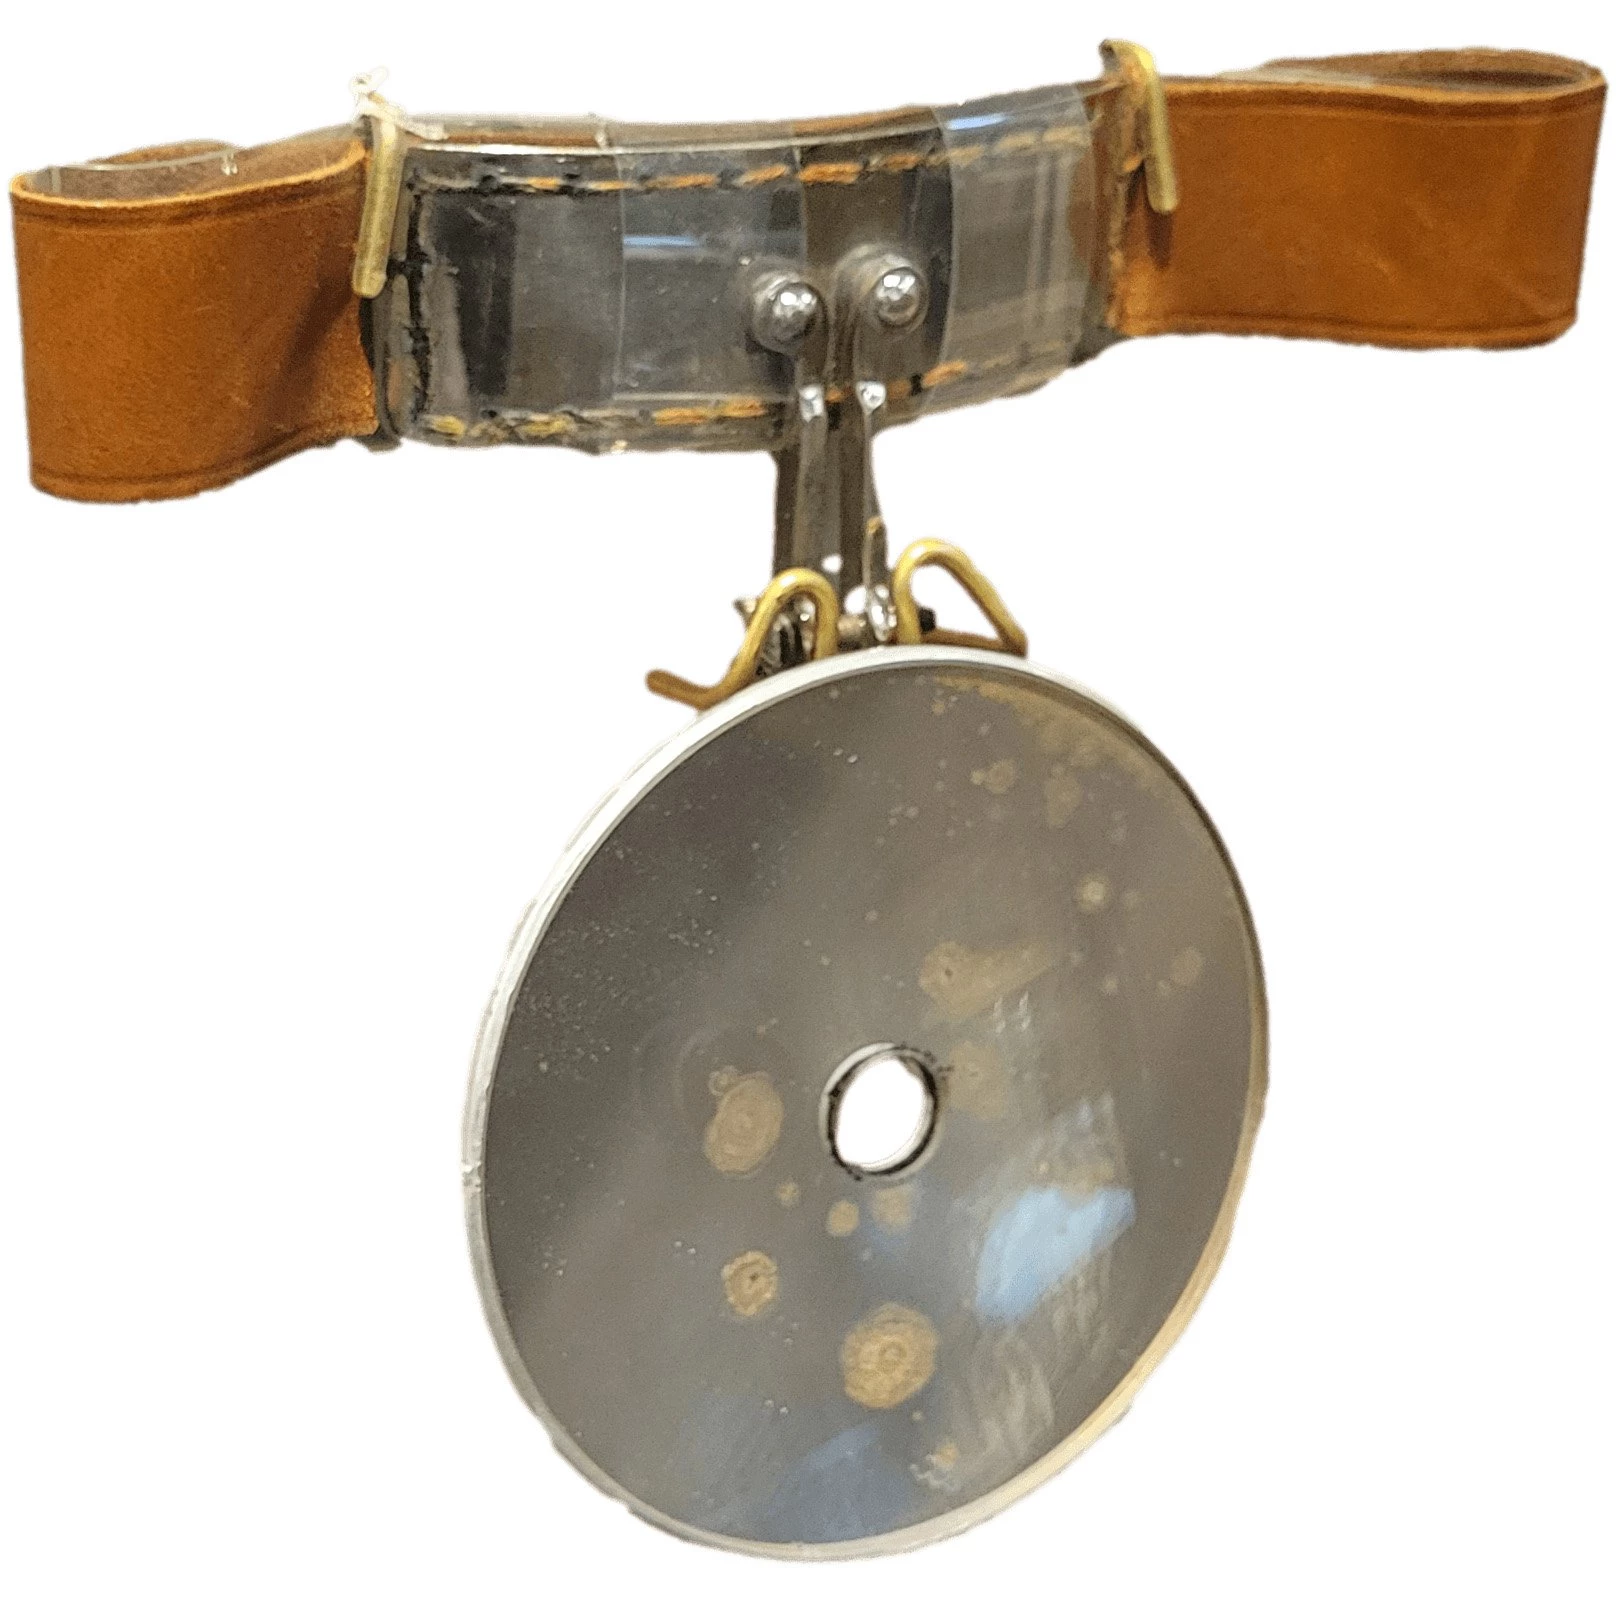 Brown leather belt with a metal rectangle at the center, stitched into the leather. Attatched to the rectangle is a round metal mirror.